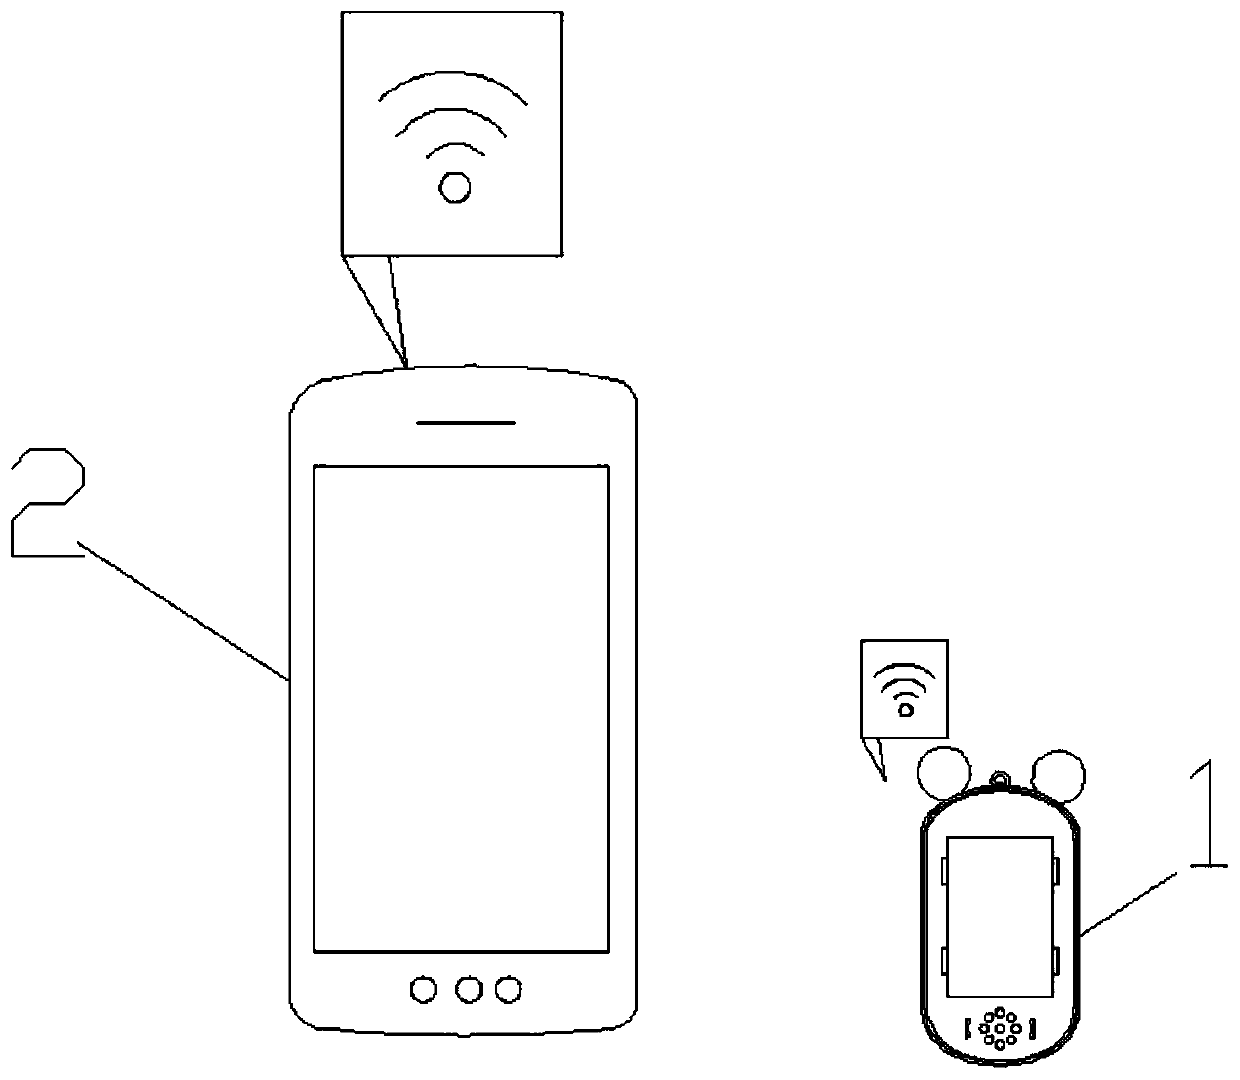 Being-away alarm system and method based on mobile phone Wi-Fi